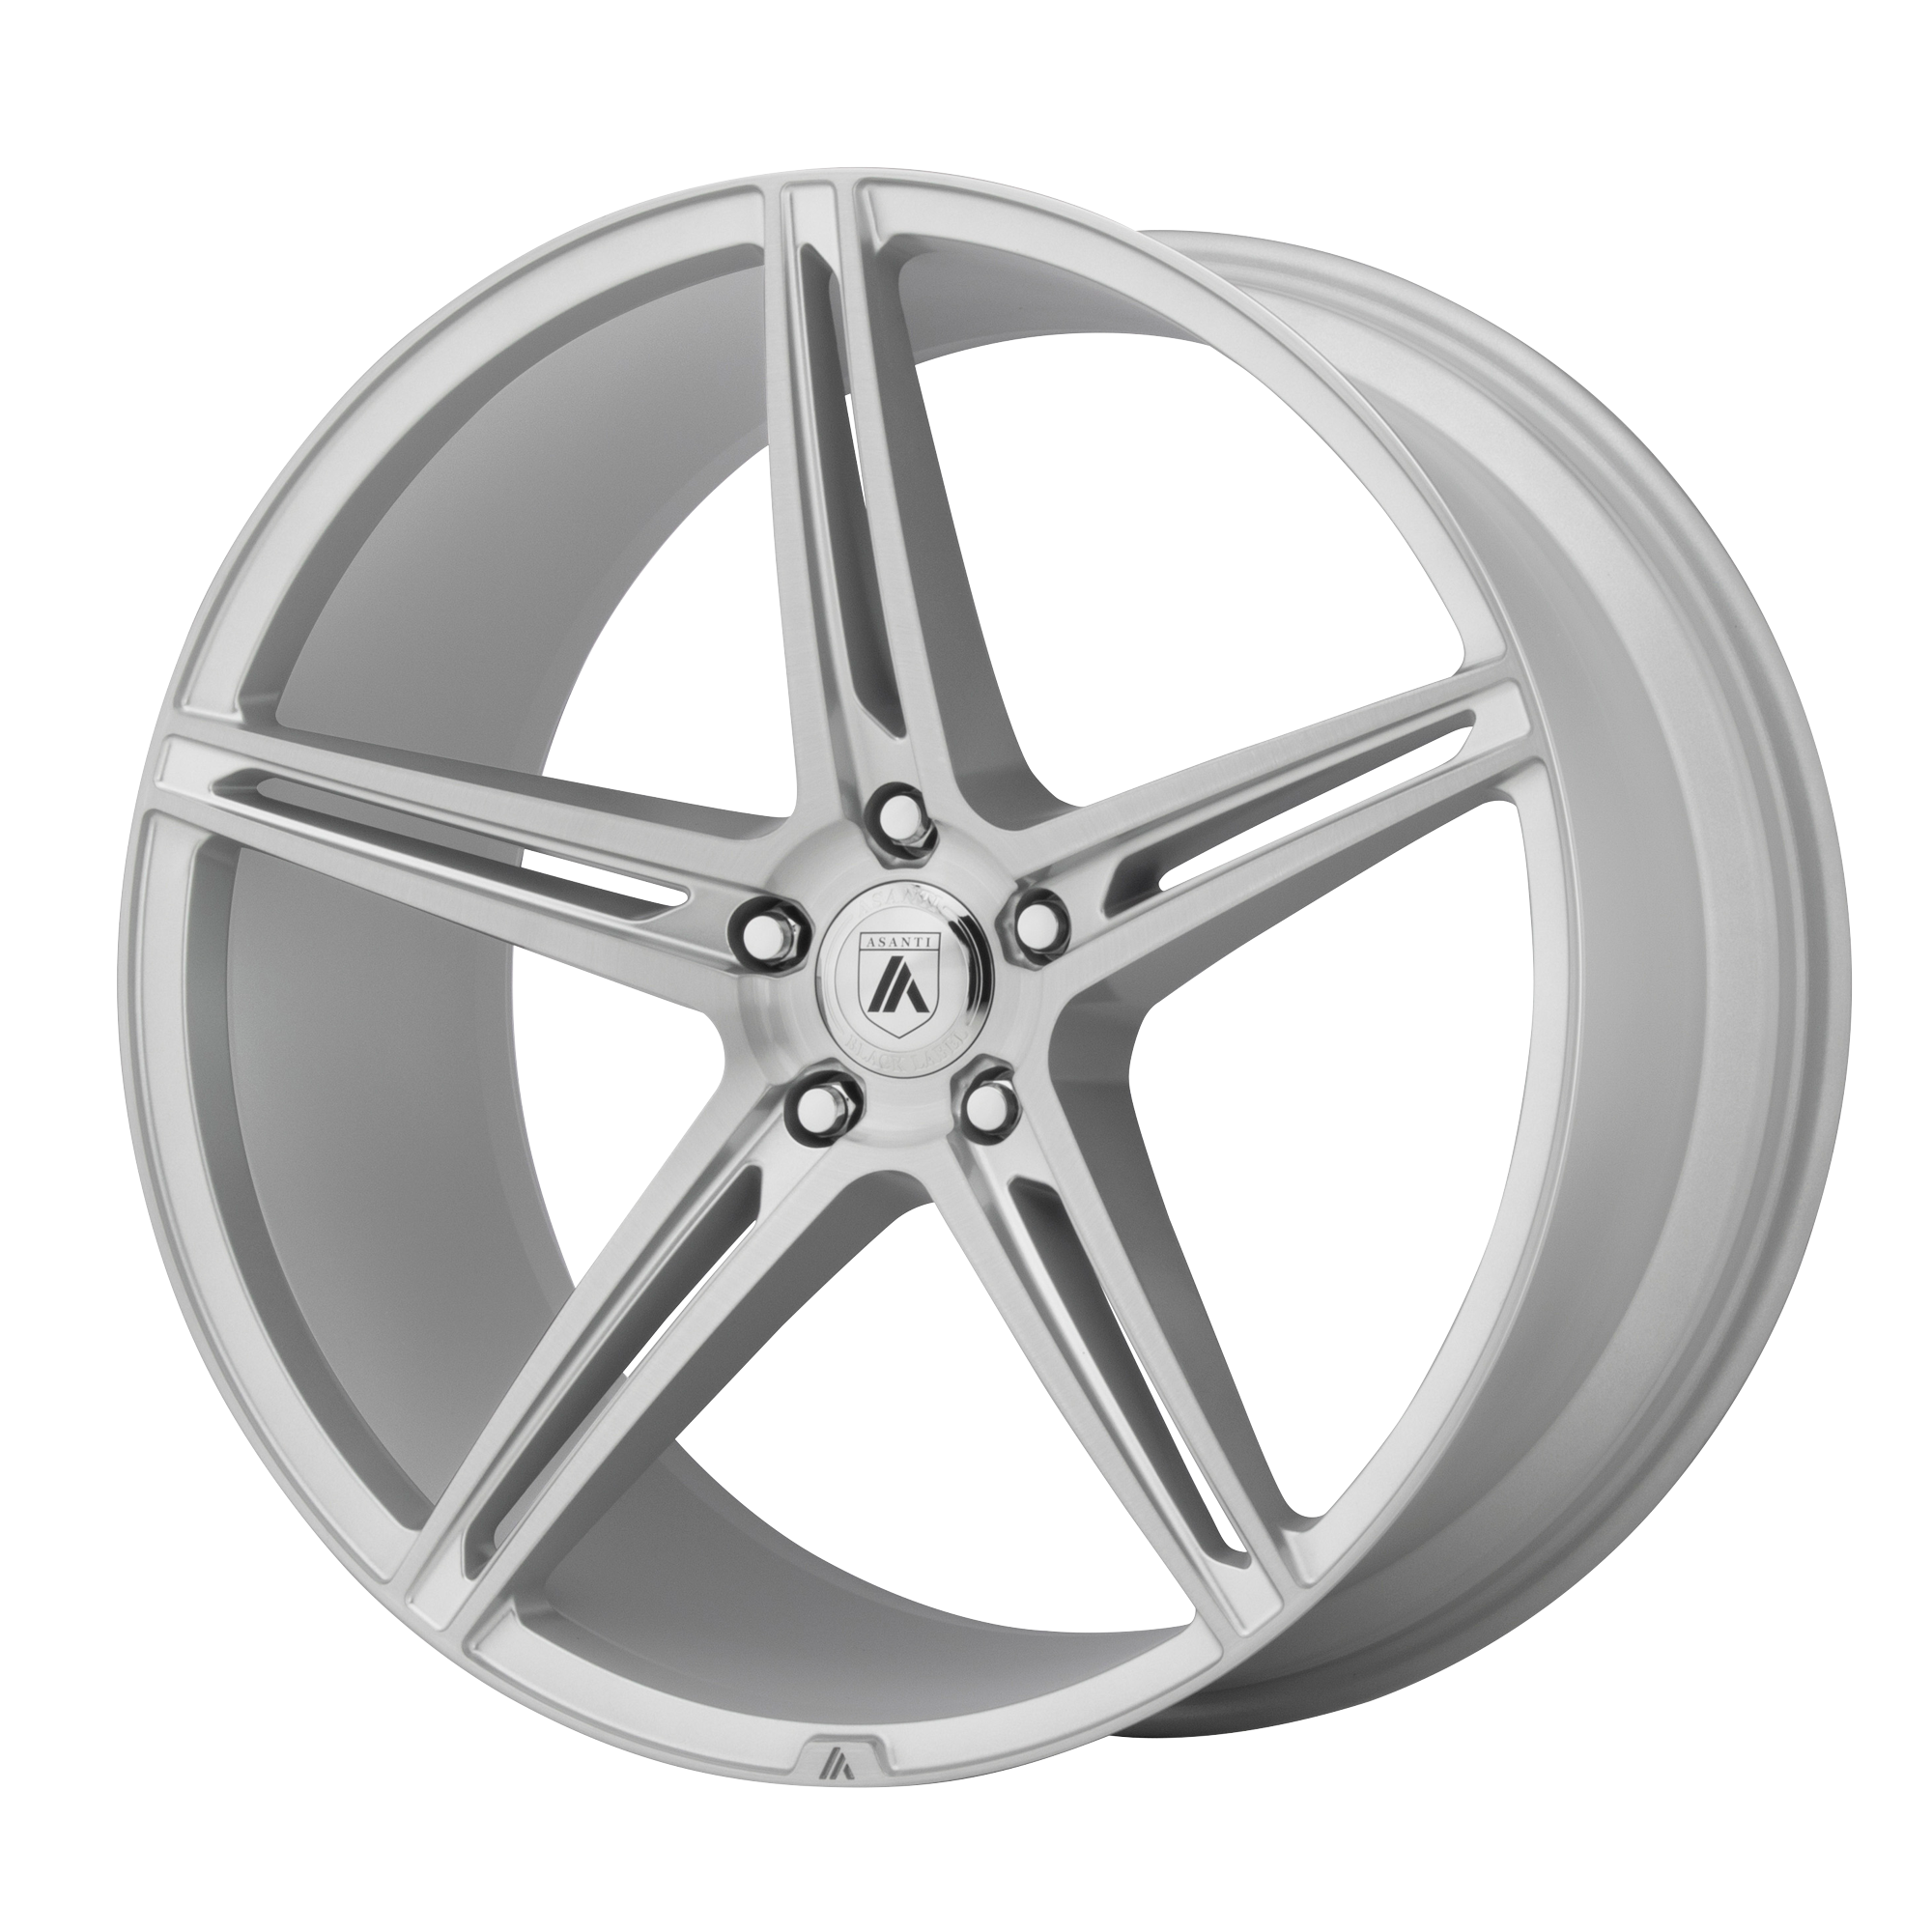 ALPHA 5 22x9 5x112.00 BRUSHED SILVER (32 mm) - Tires and Engine Performance